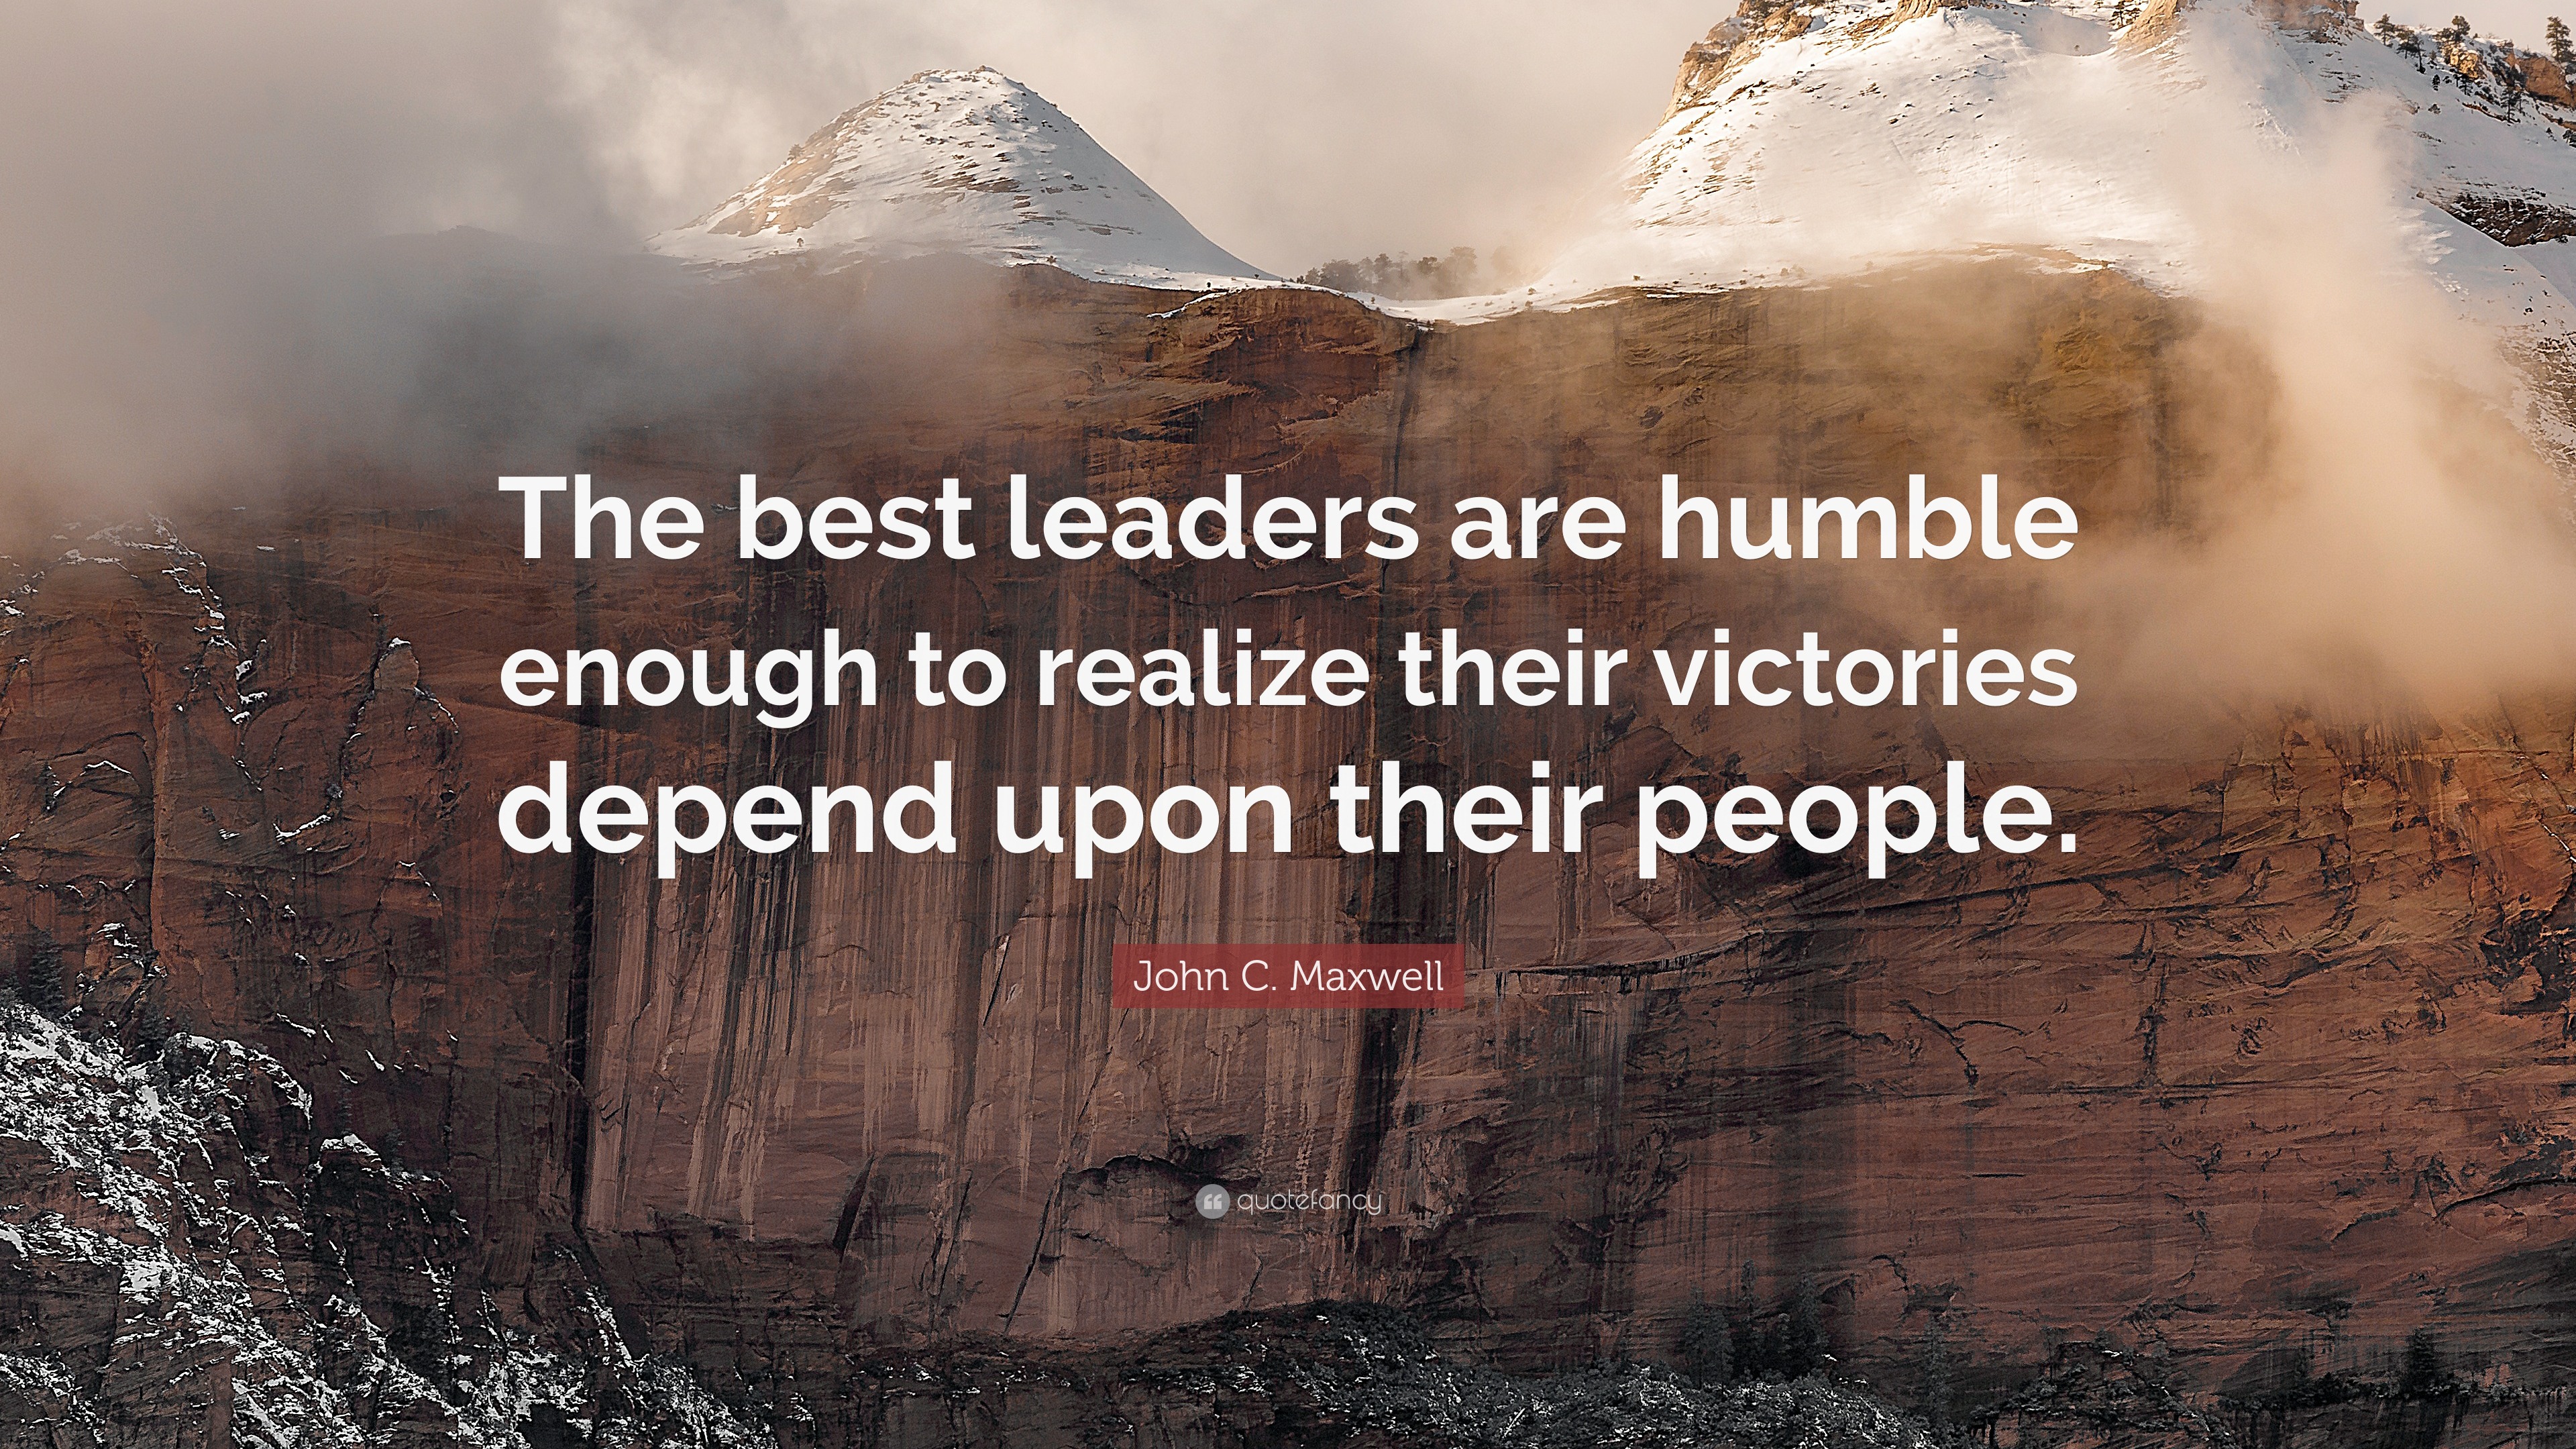 What is a humble quote for leadership?